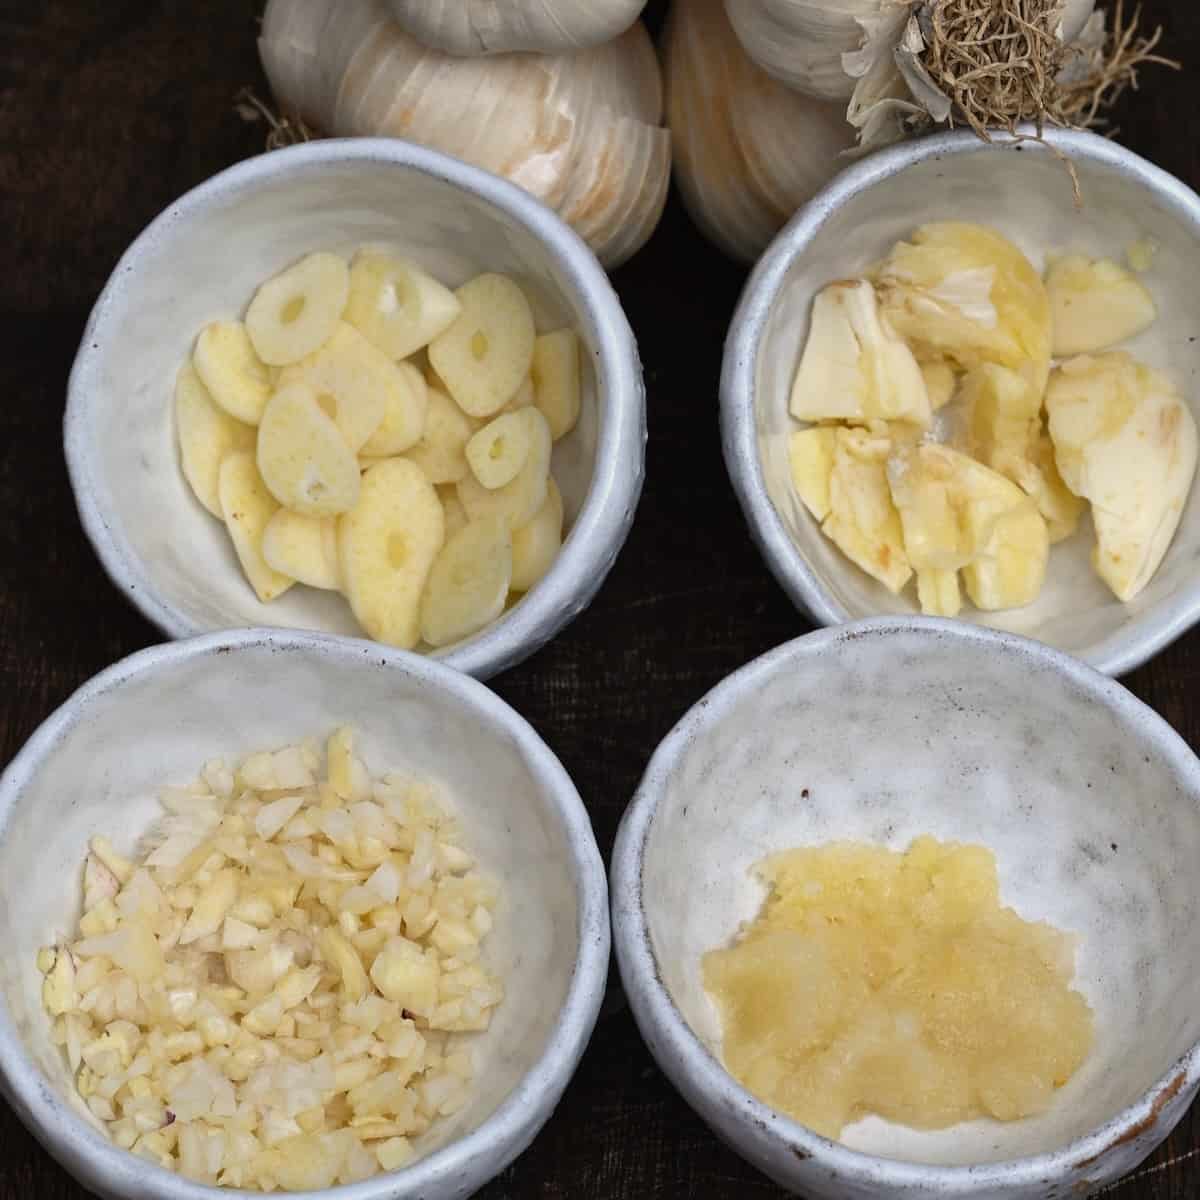 Little bowls with sliced, crushed, minced and pressed garlic